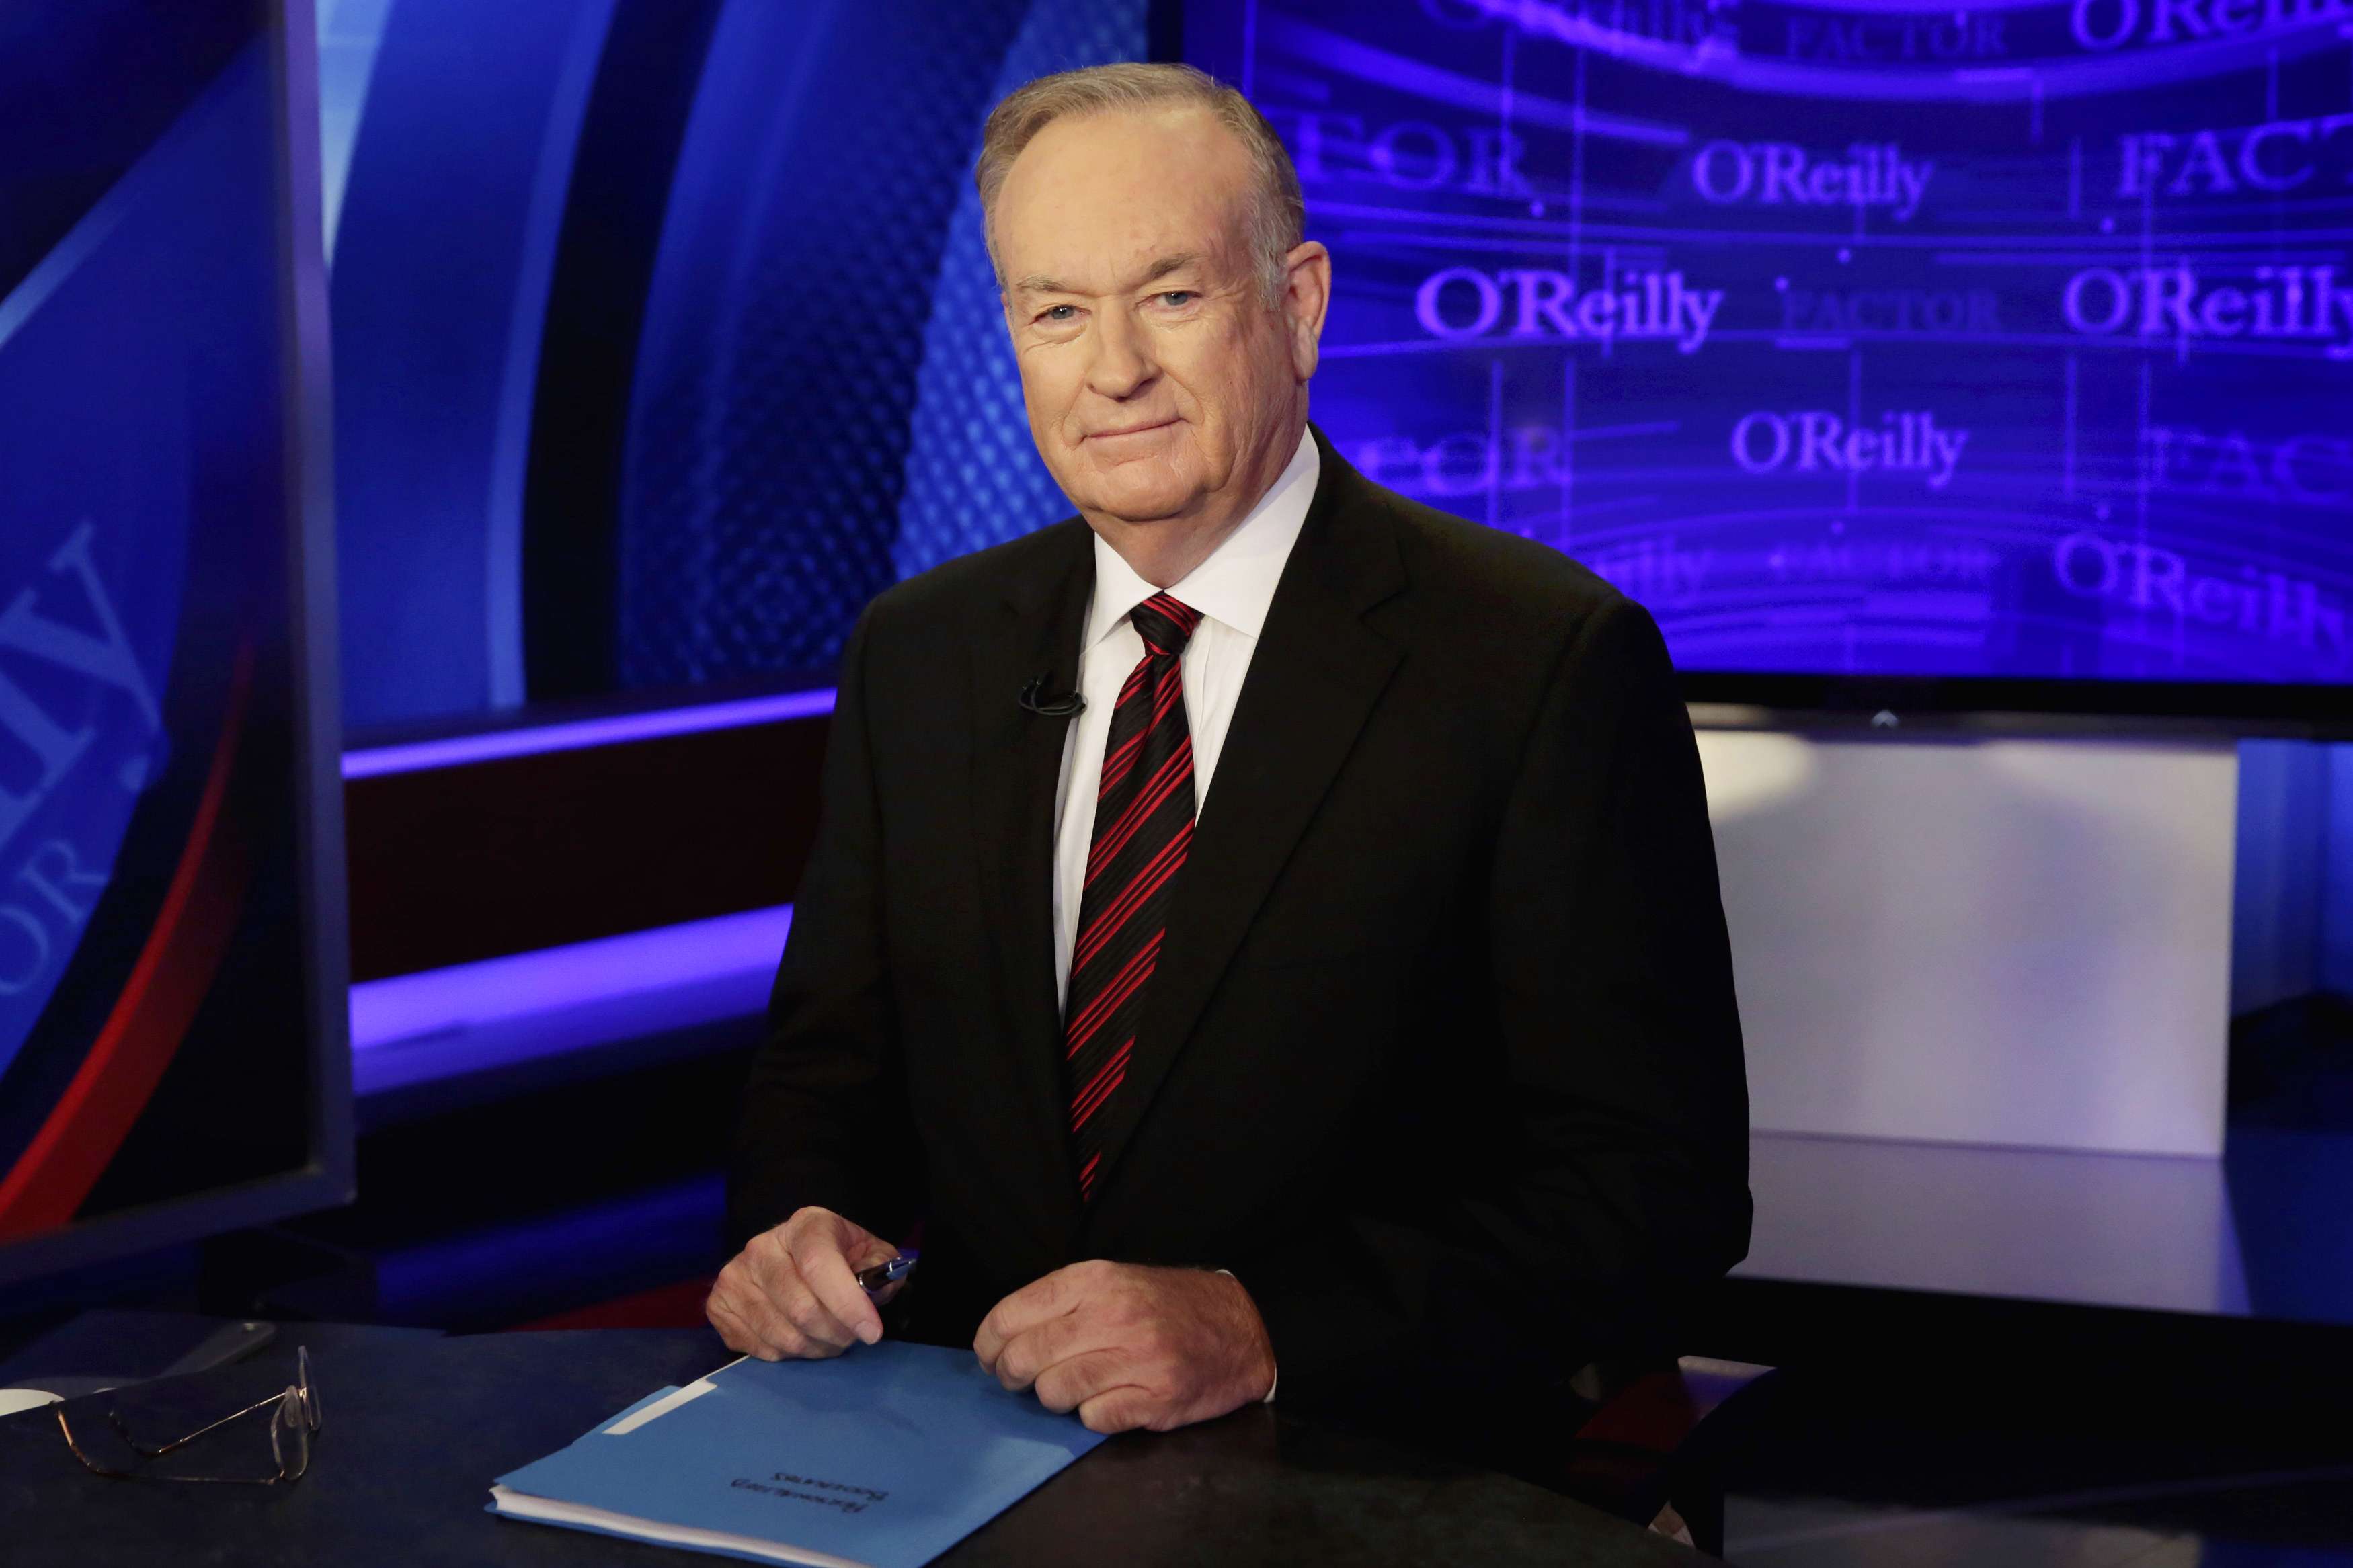 Bill O'Reilly of "The O'Reilly Factor" on the Fox News Channel, poses for photos in the set in New York. O'Reilly has lost his job at Fox News Channel following reports that five women had been paid millions of dollars to keep quiet about harassment allegations. Photo: AP